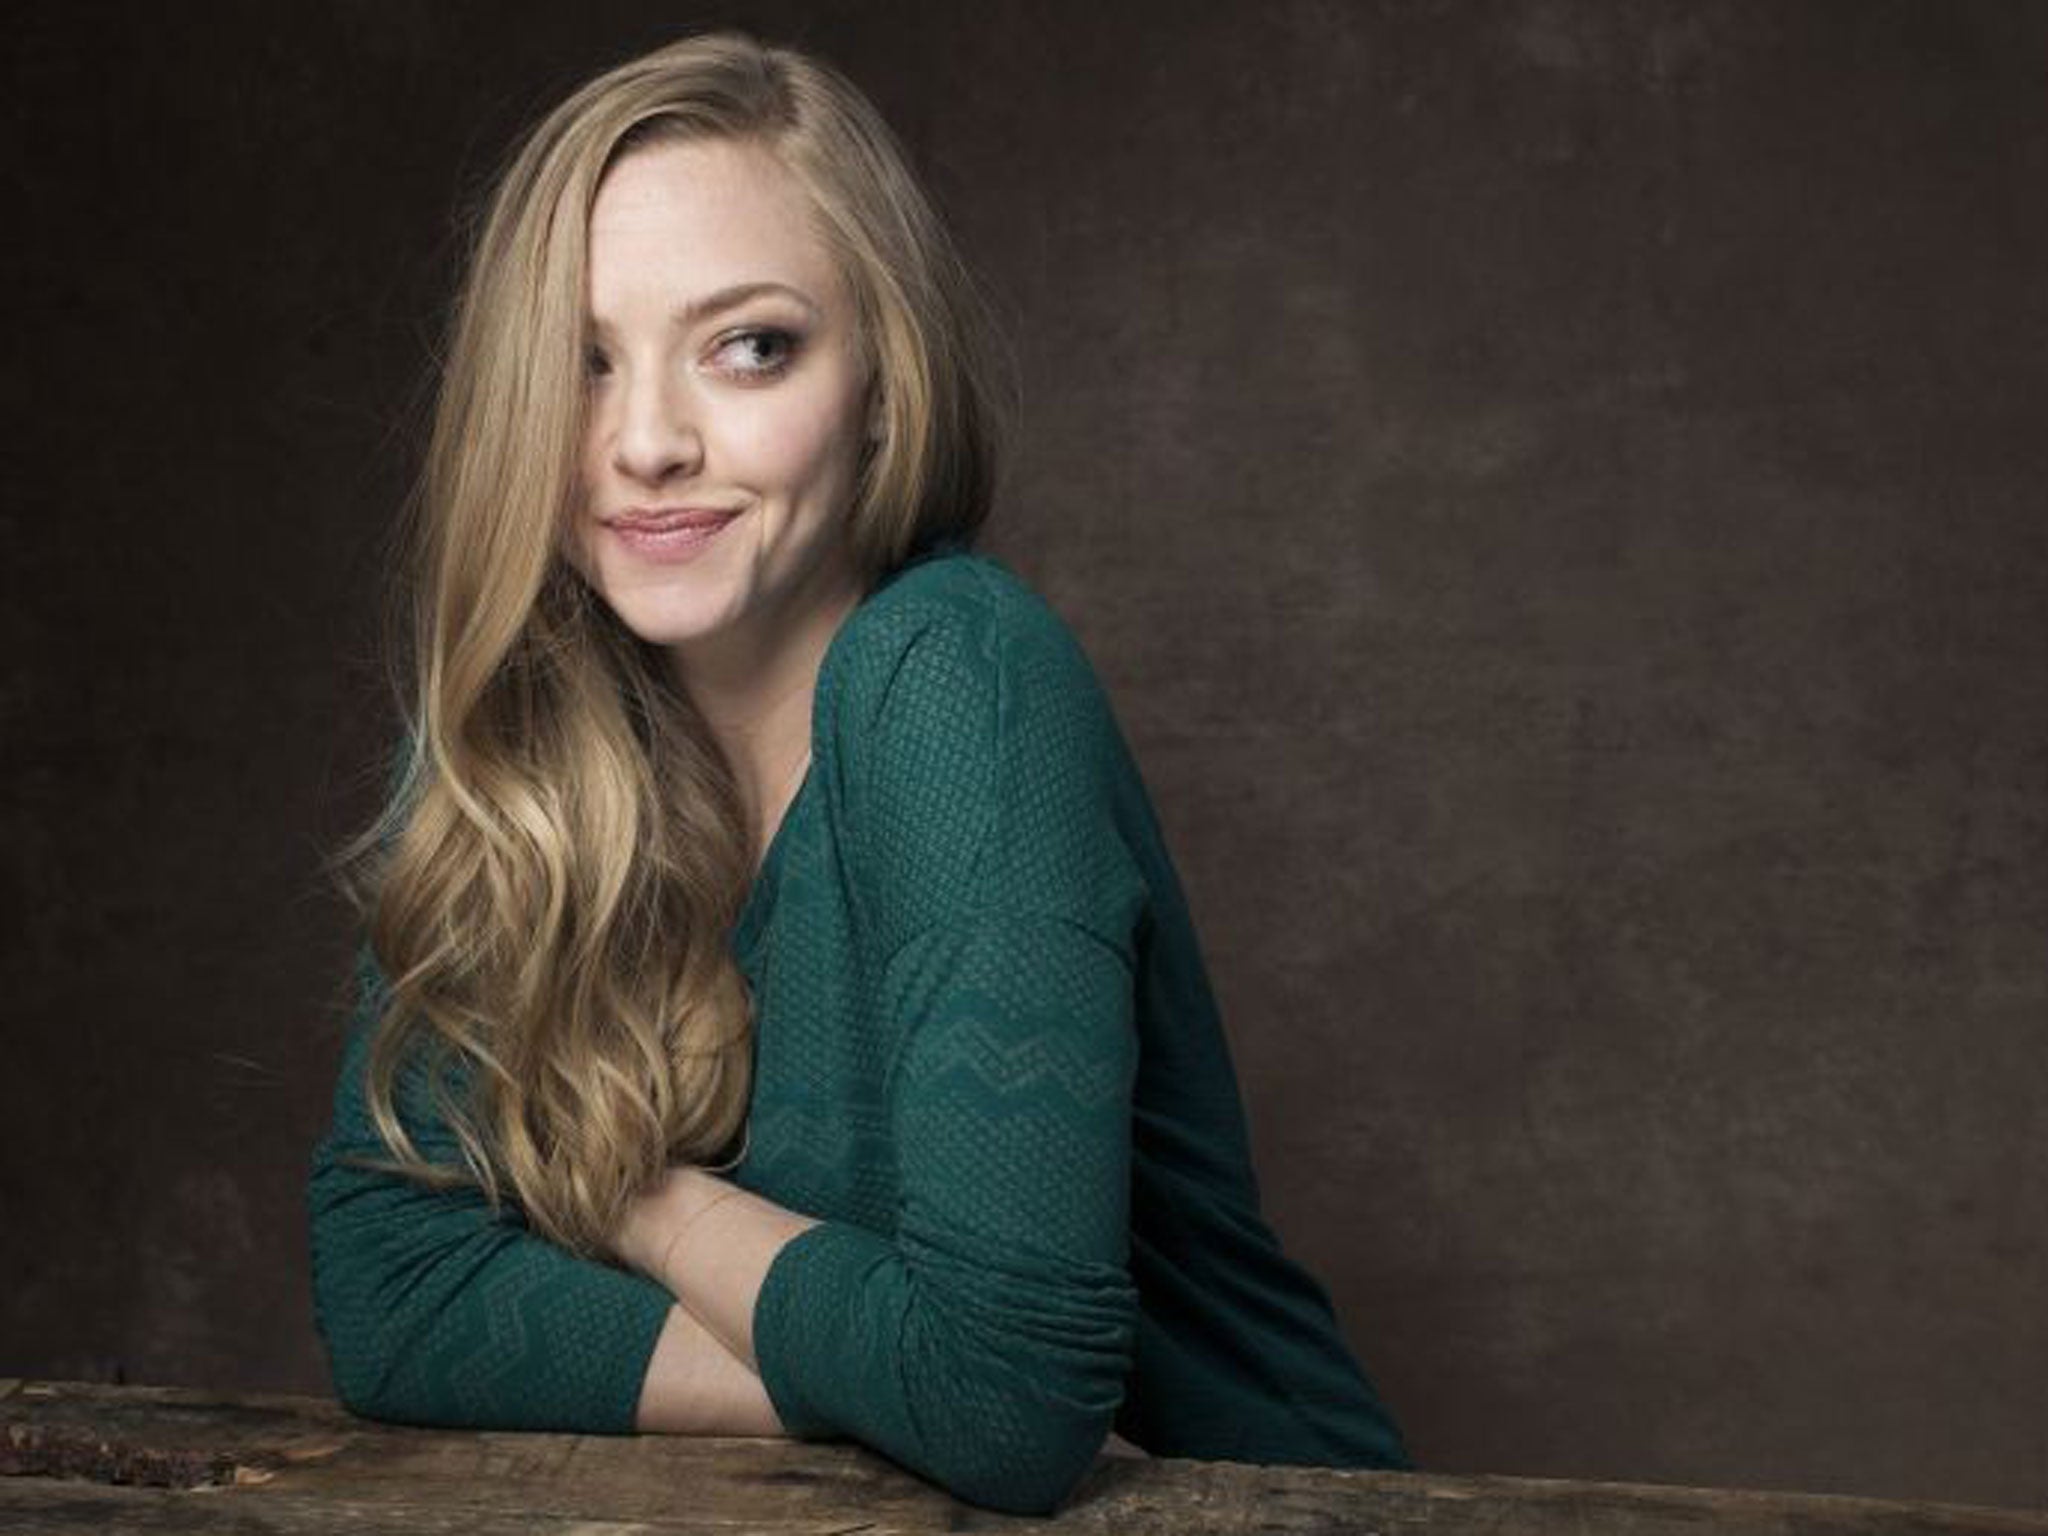 Amanda Seyfried: The girl next door with a dark side | The ...